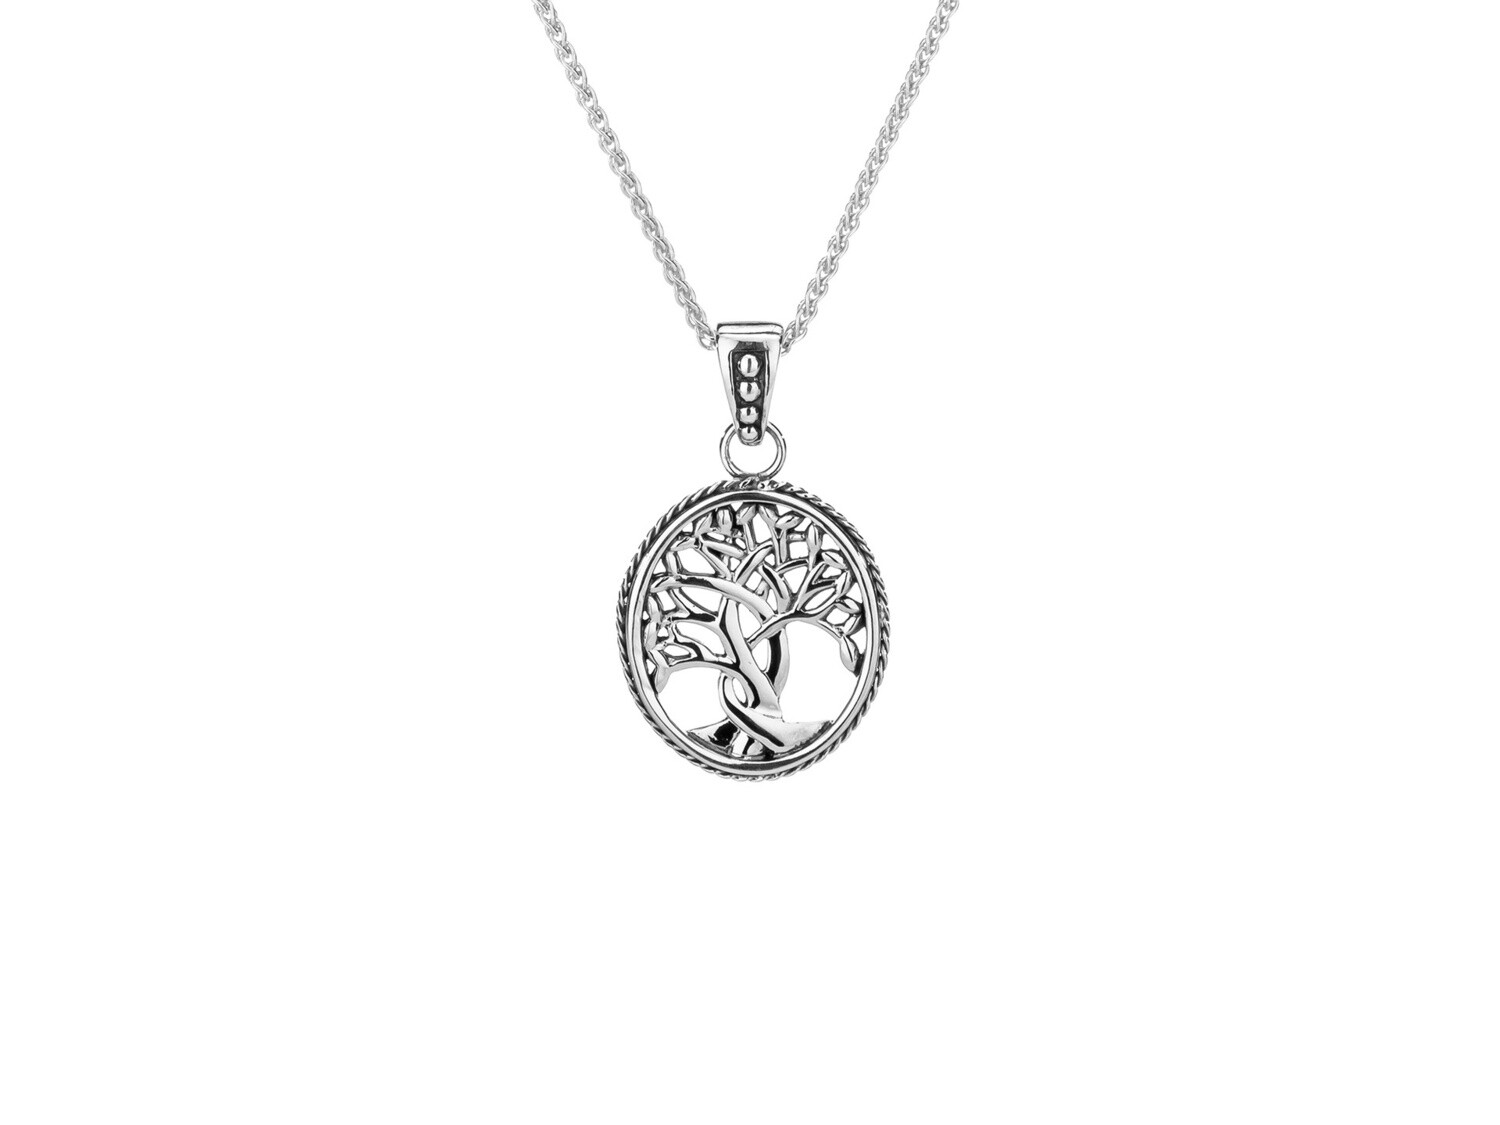 STERLING SILVER TREE OF LIFE PENDANT - SMALL